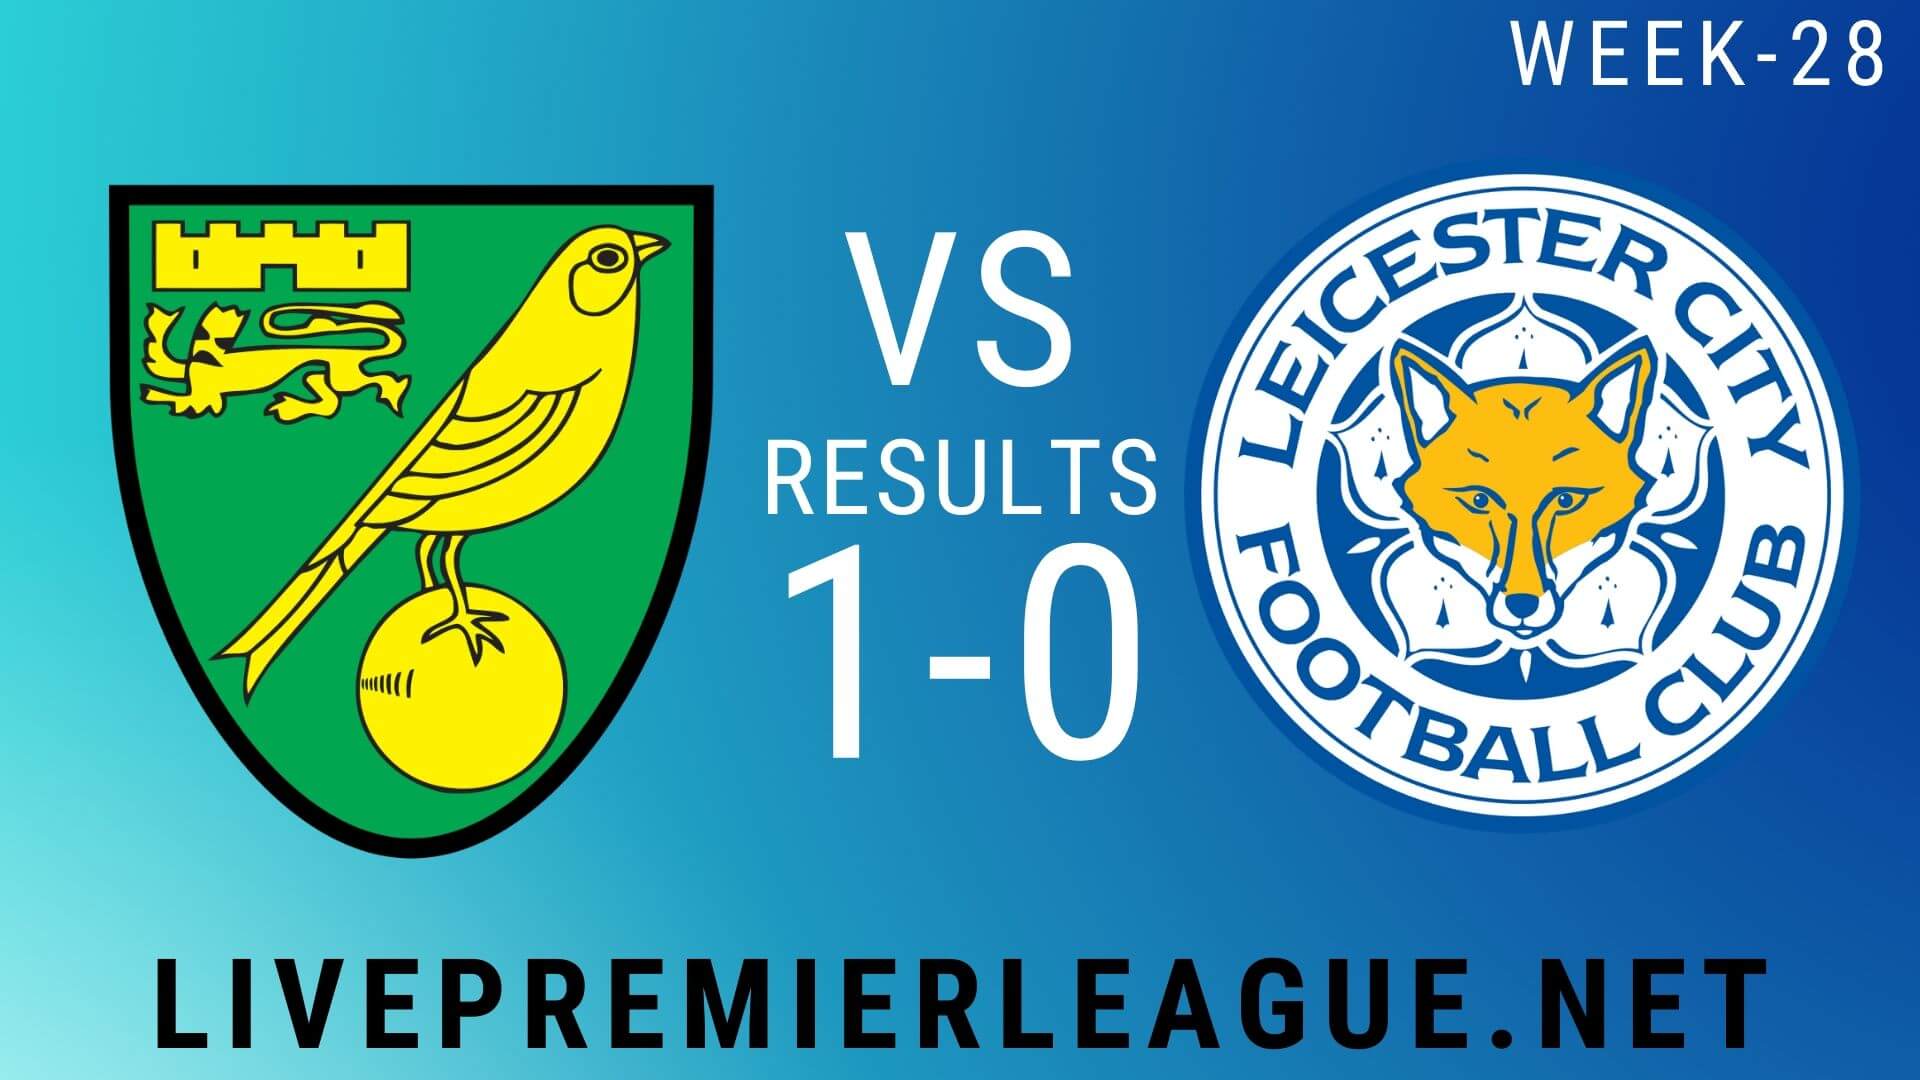 Norwich City Vs Leicester City | Week 28 Result 2020